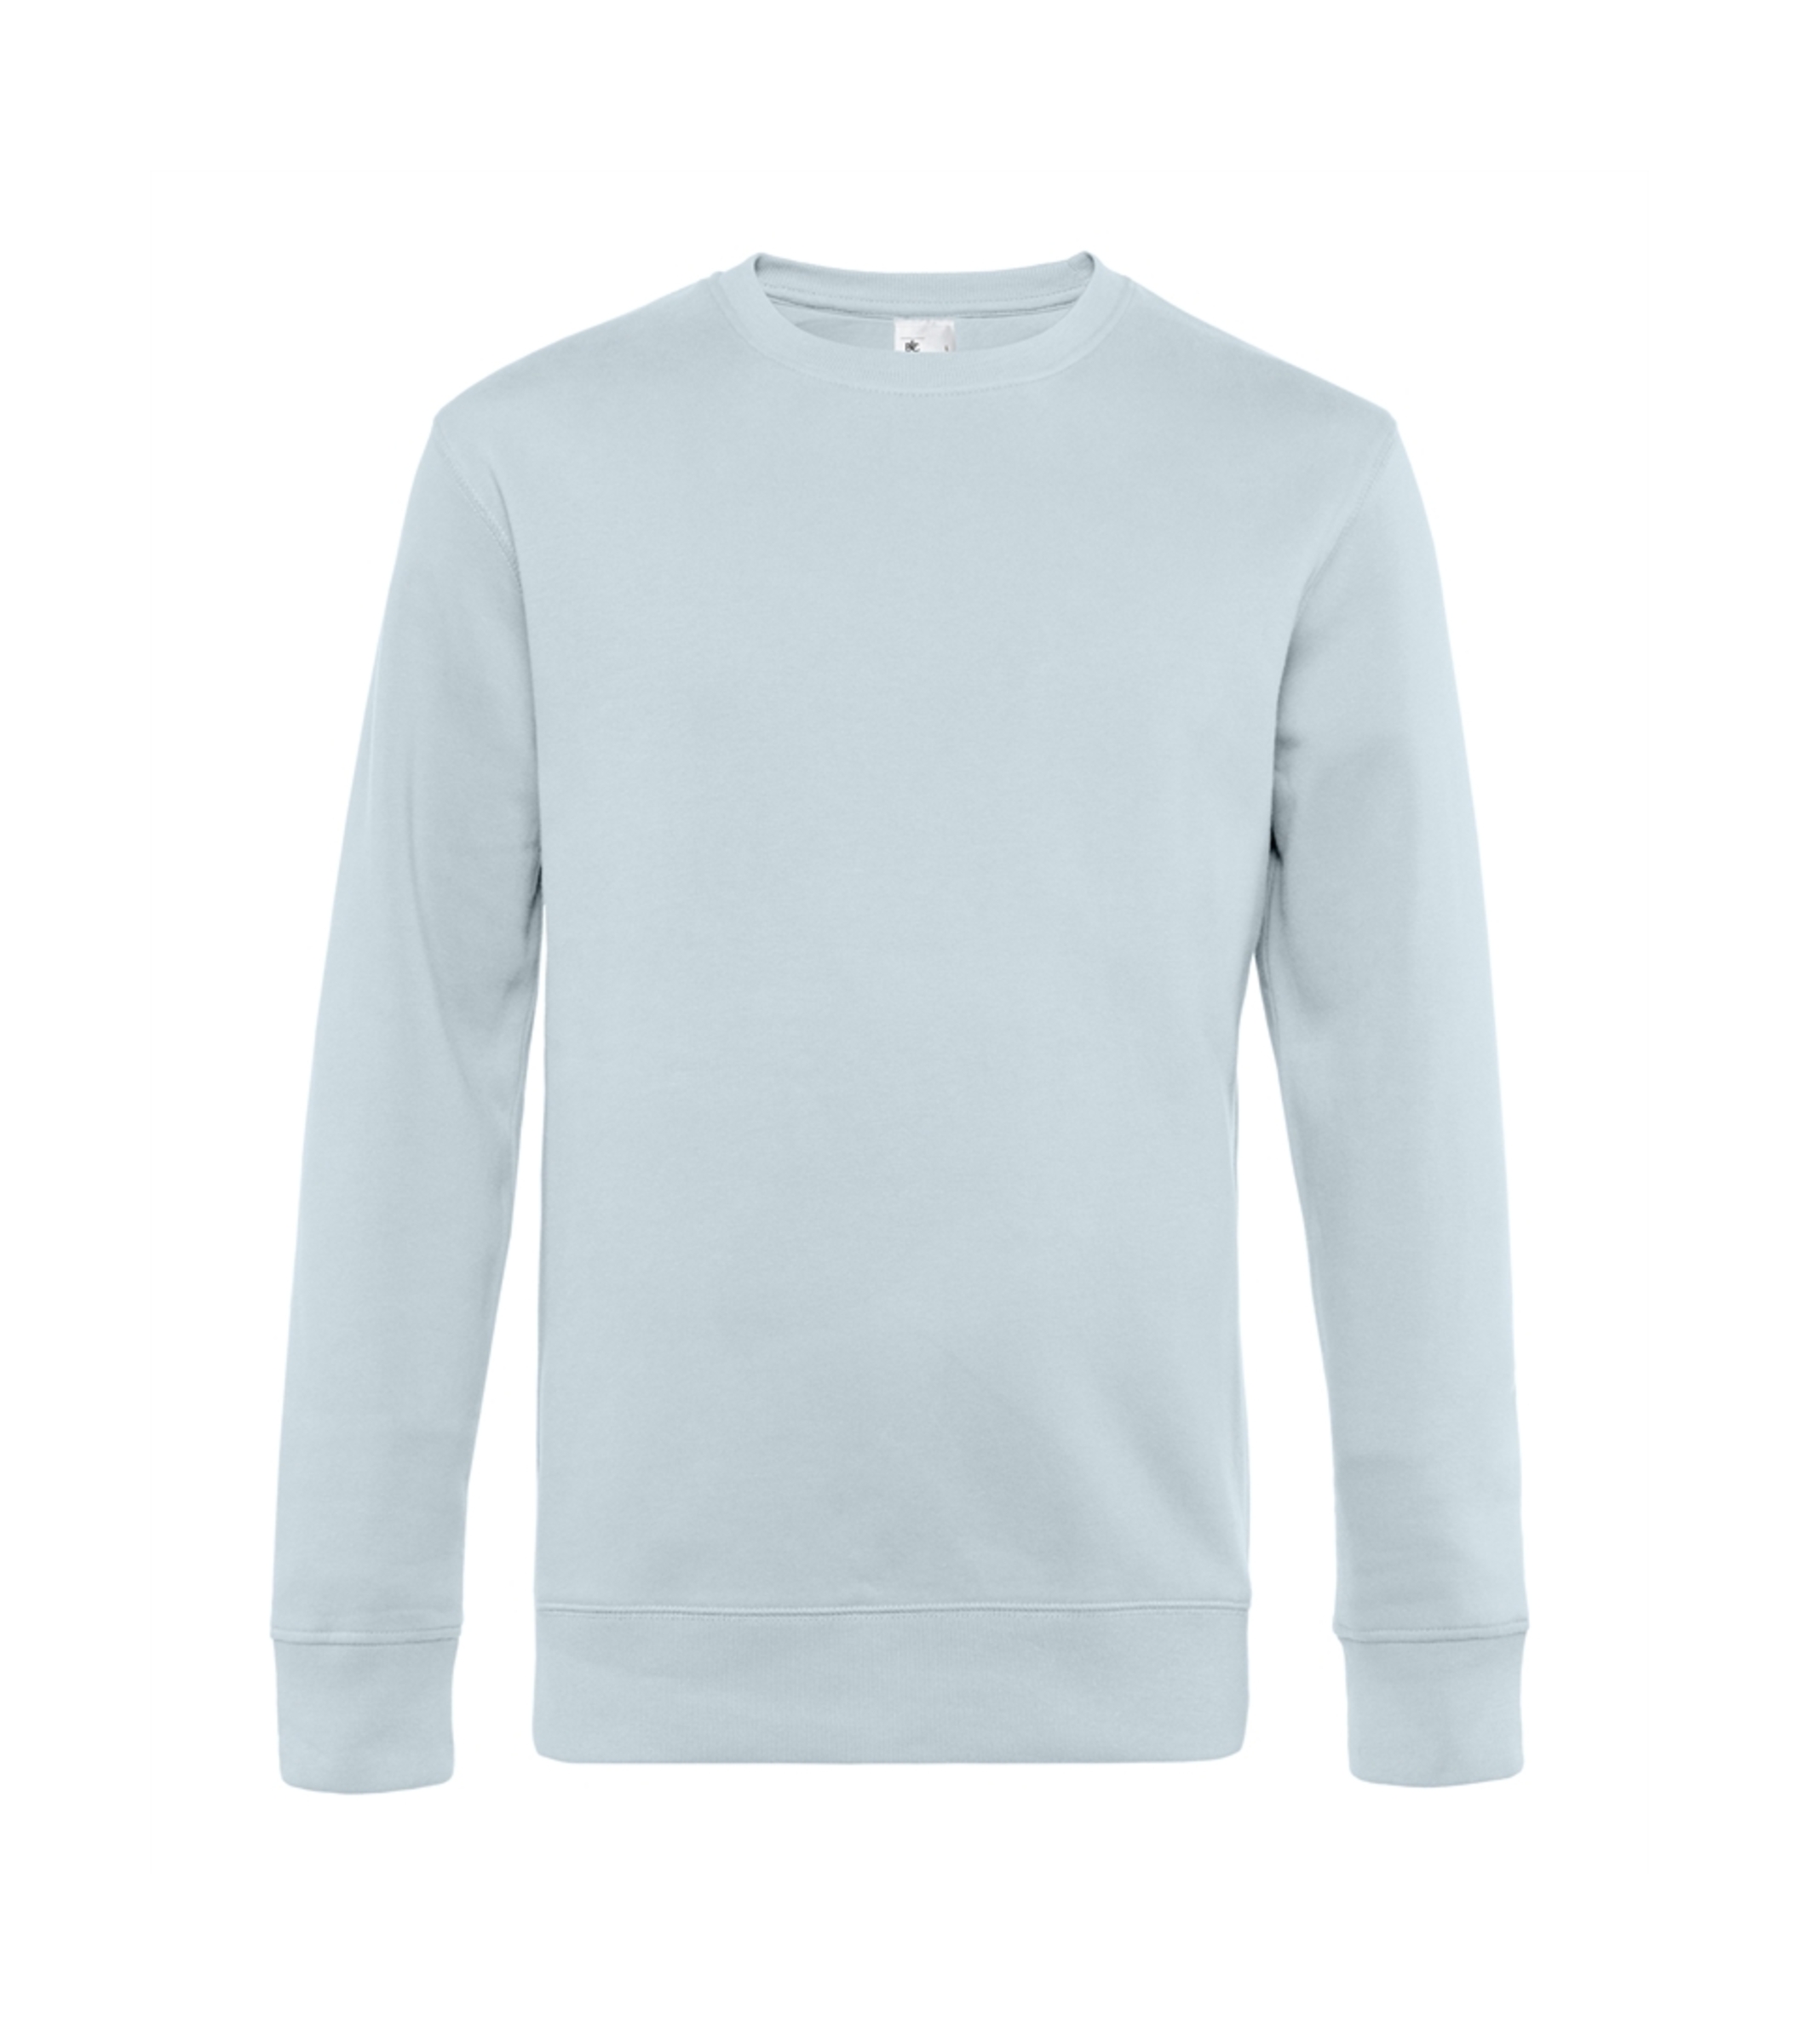 B And C Collection B&C King Crew Neck - Puresky - Xs